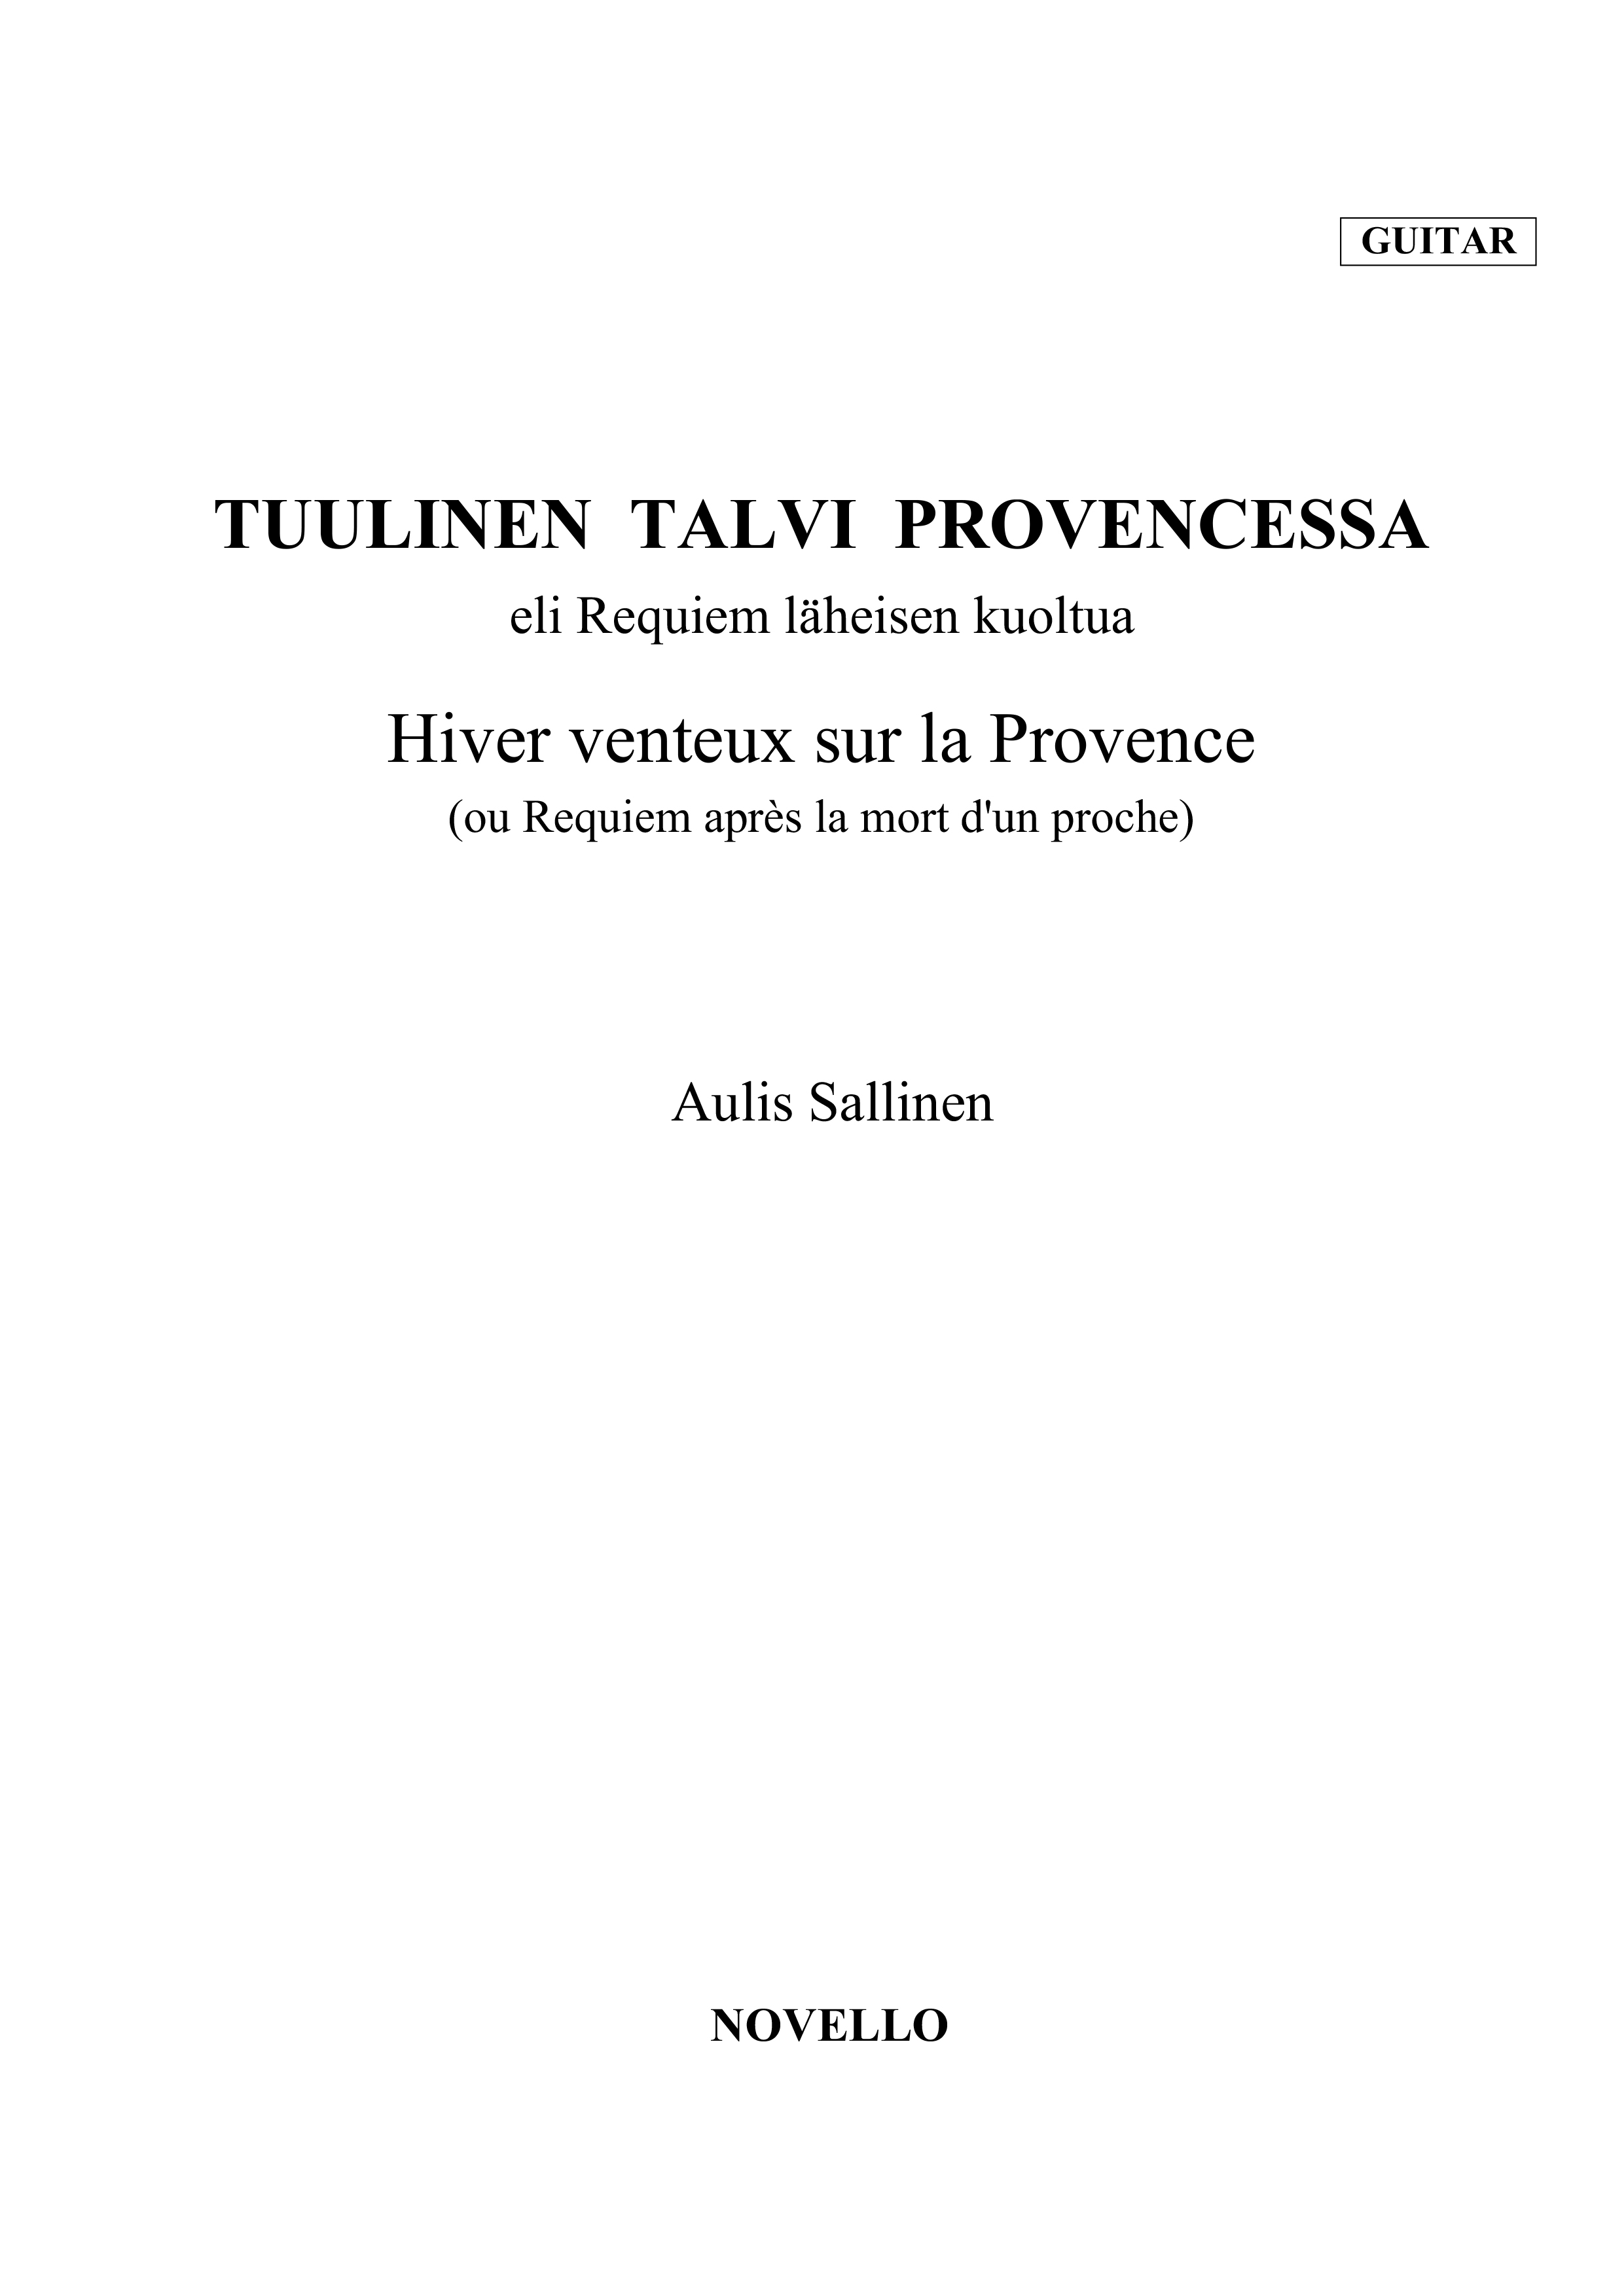 Aulis Sallinen: A Windy Winter In Provence (Violin/Guitar Parts): Chamber